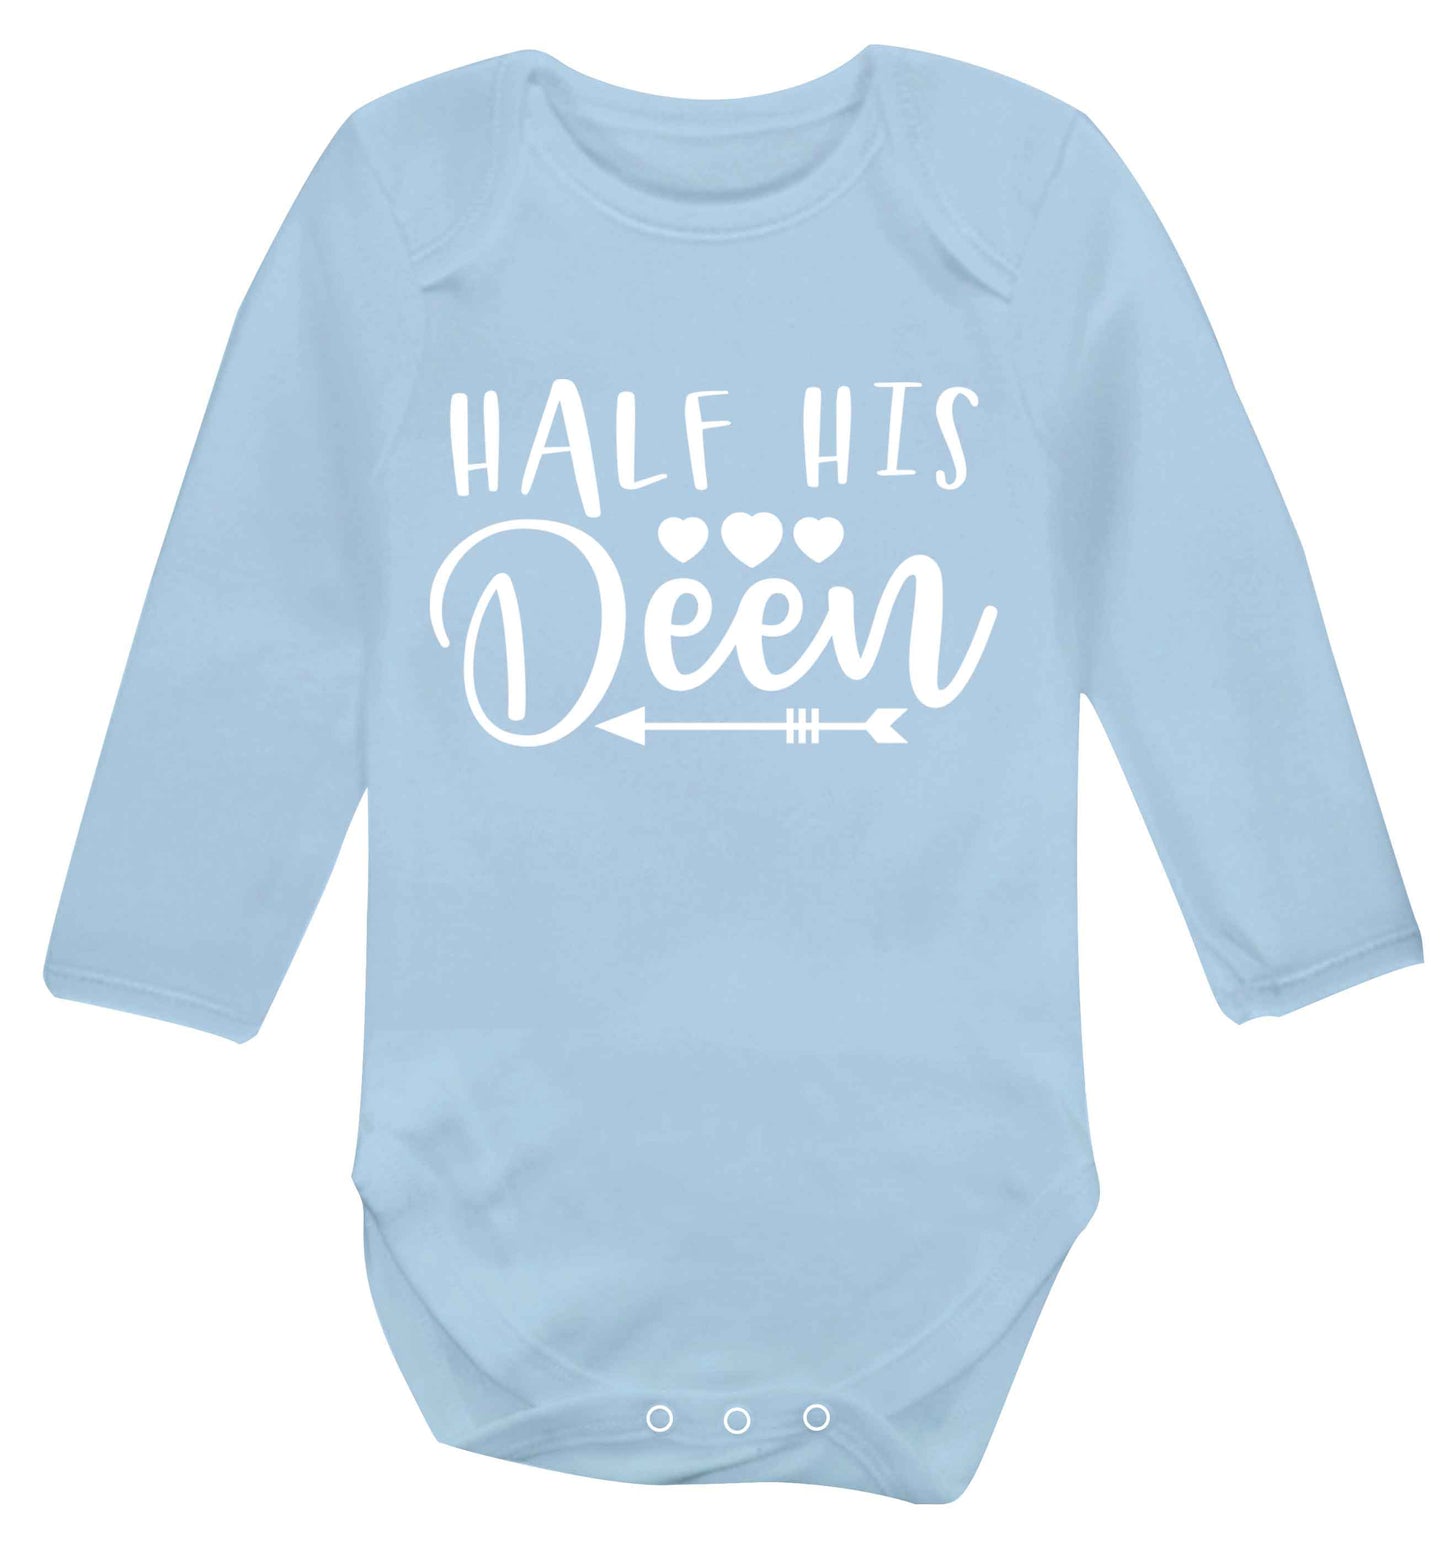 Half his deen Baby Vest long sleeved pale blue 6-12 months